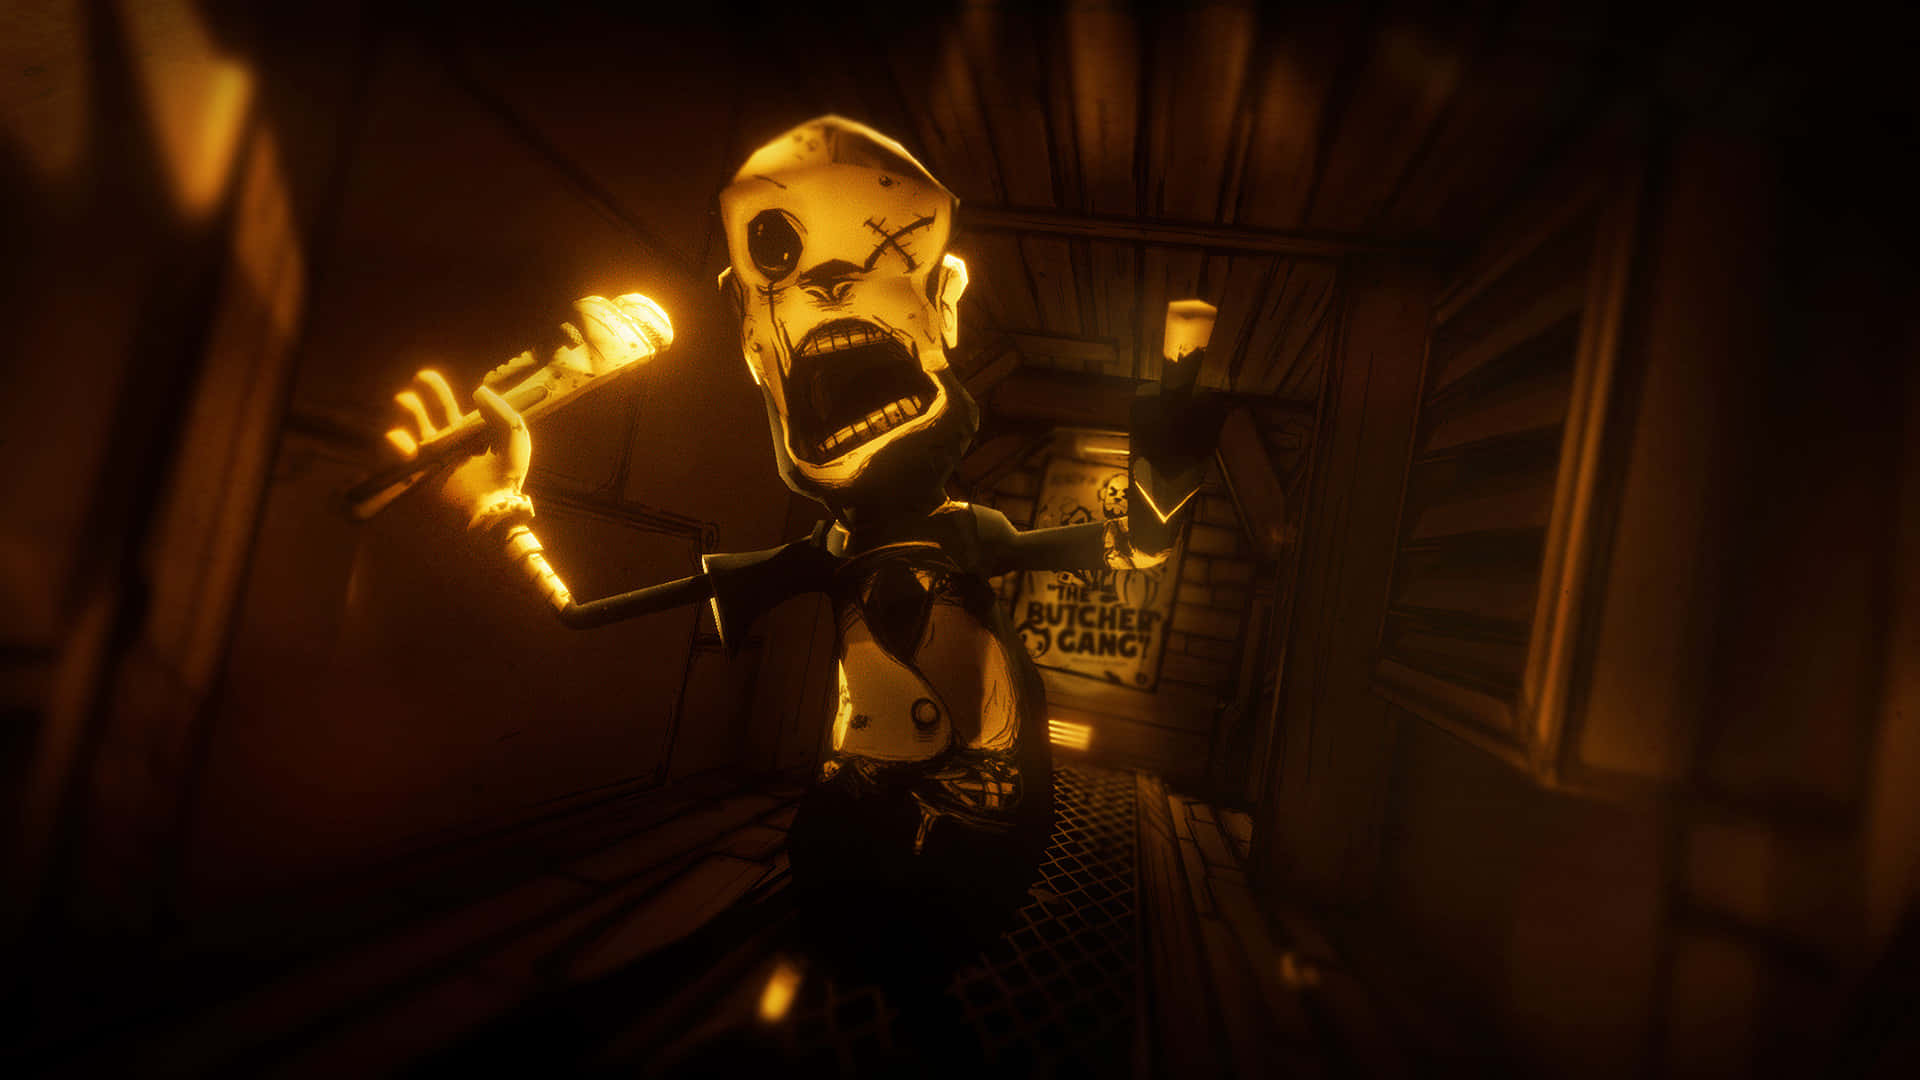 Take a walk in an ink-filled mayhem with Bendy and the Ink Machine